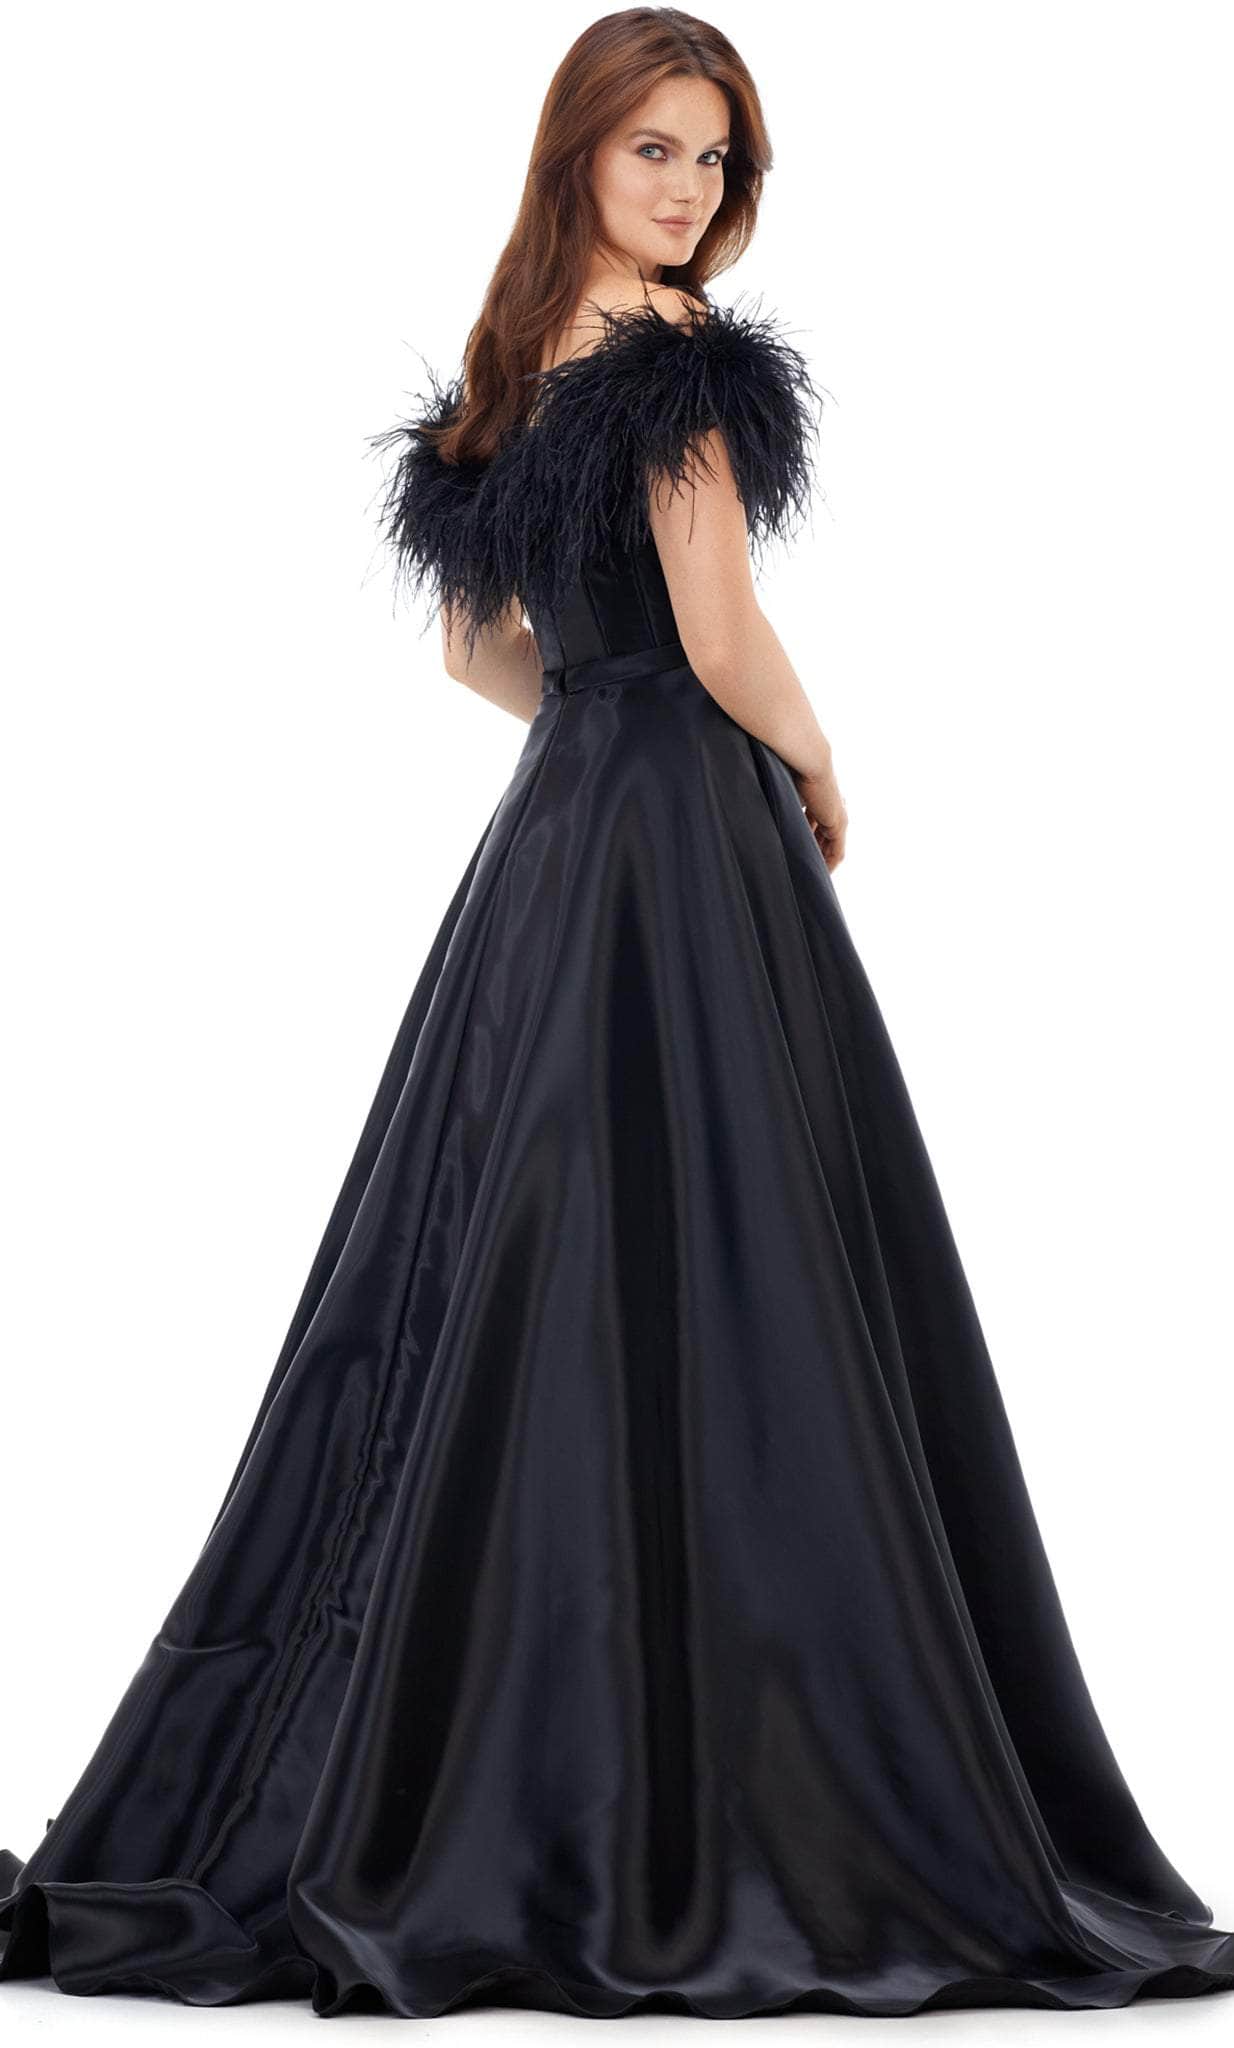 Ashley Lauren 11382 - Feathered Off-Shoulder Ballgown Special Occasion Dress